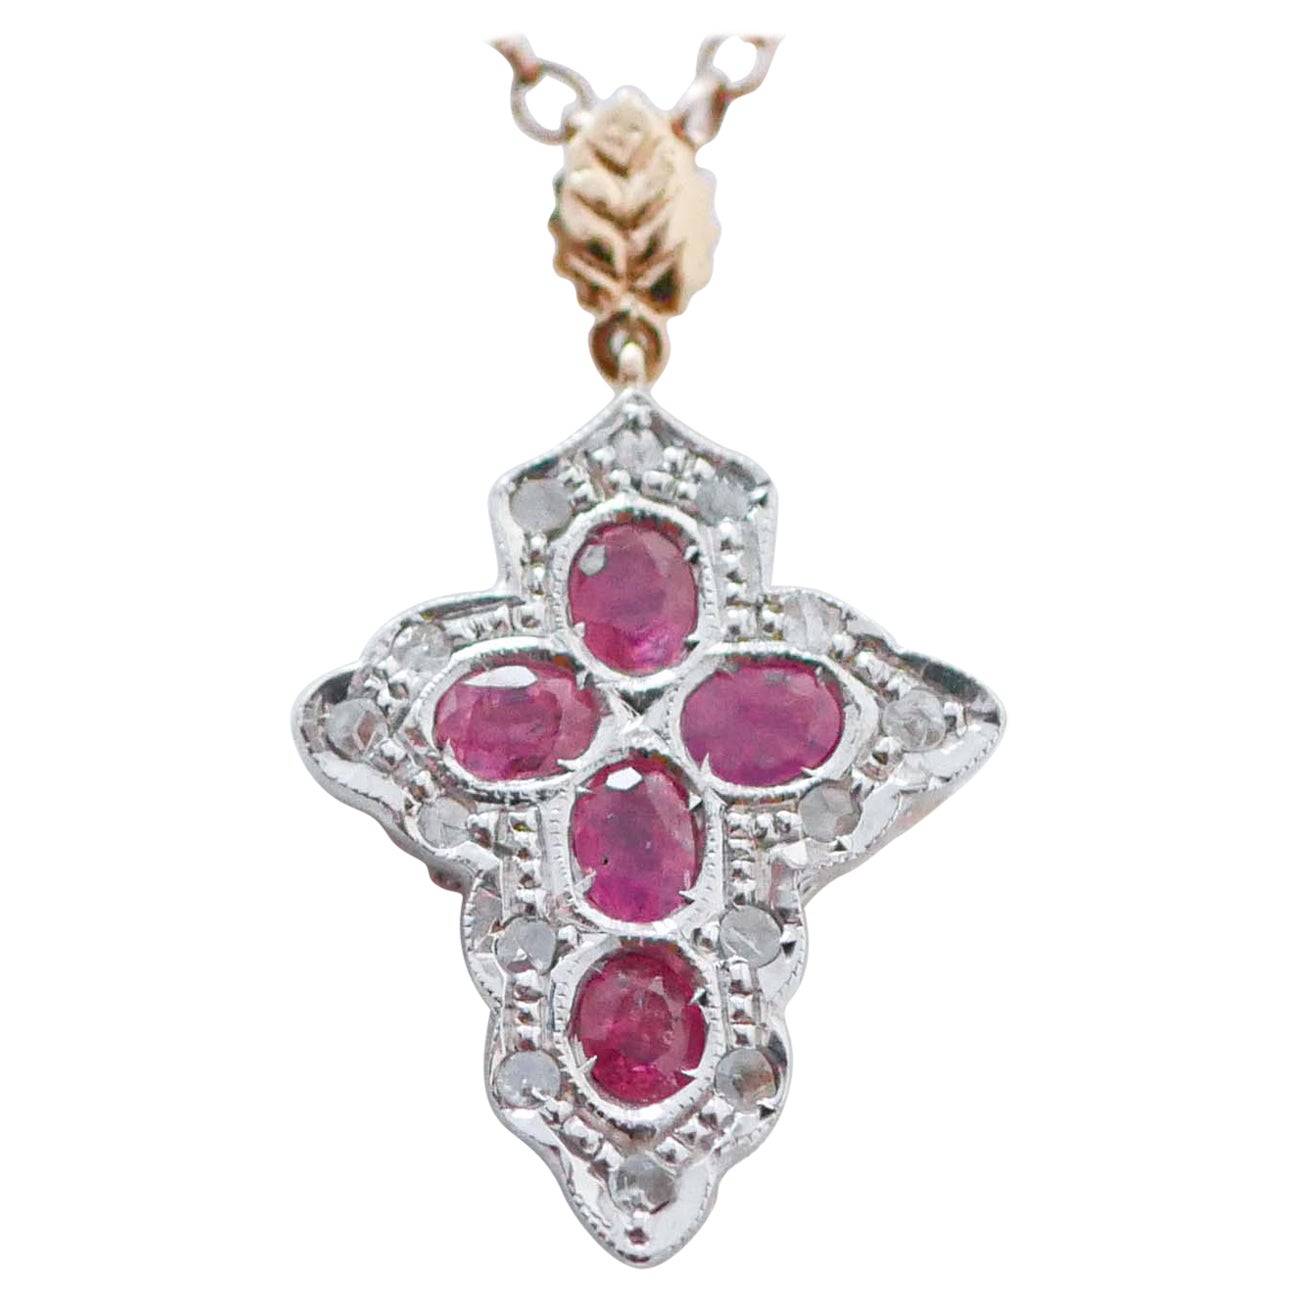 Rubies, Diamonds, Rose Gold and Silver Cross Pendant. For Sale